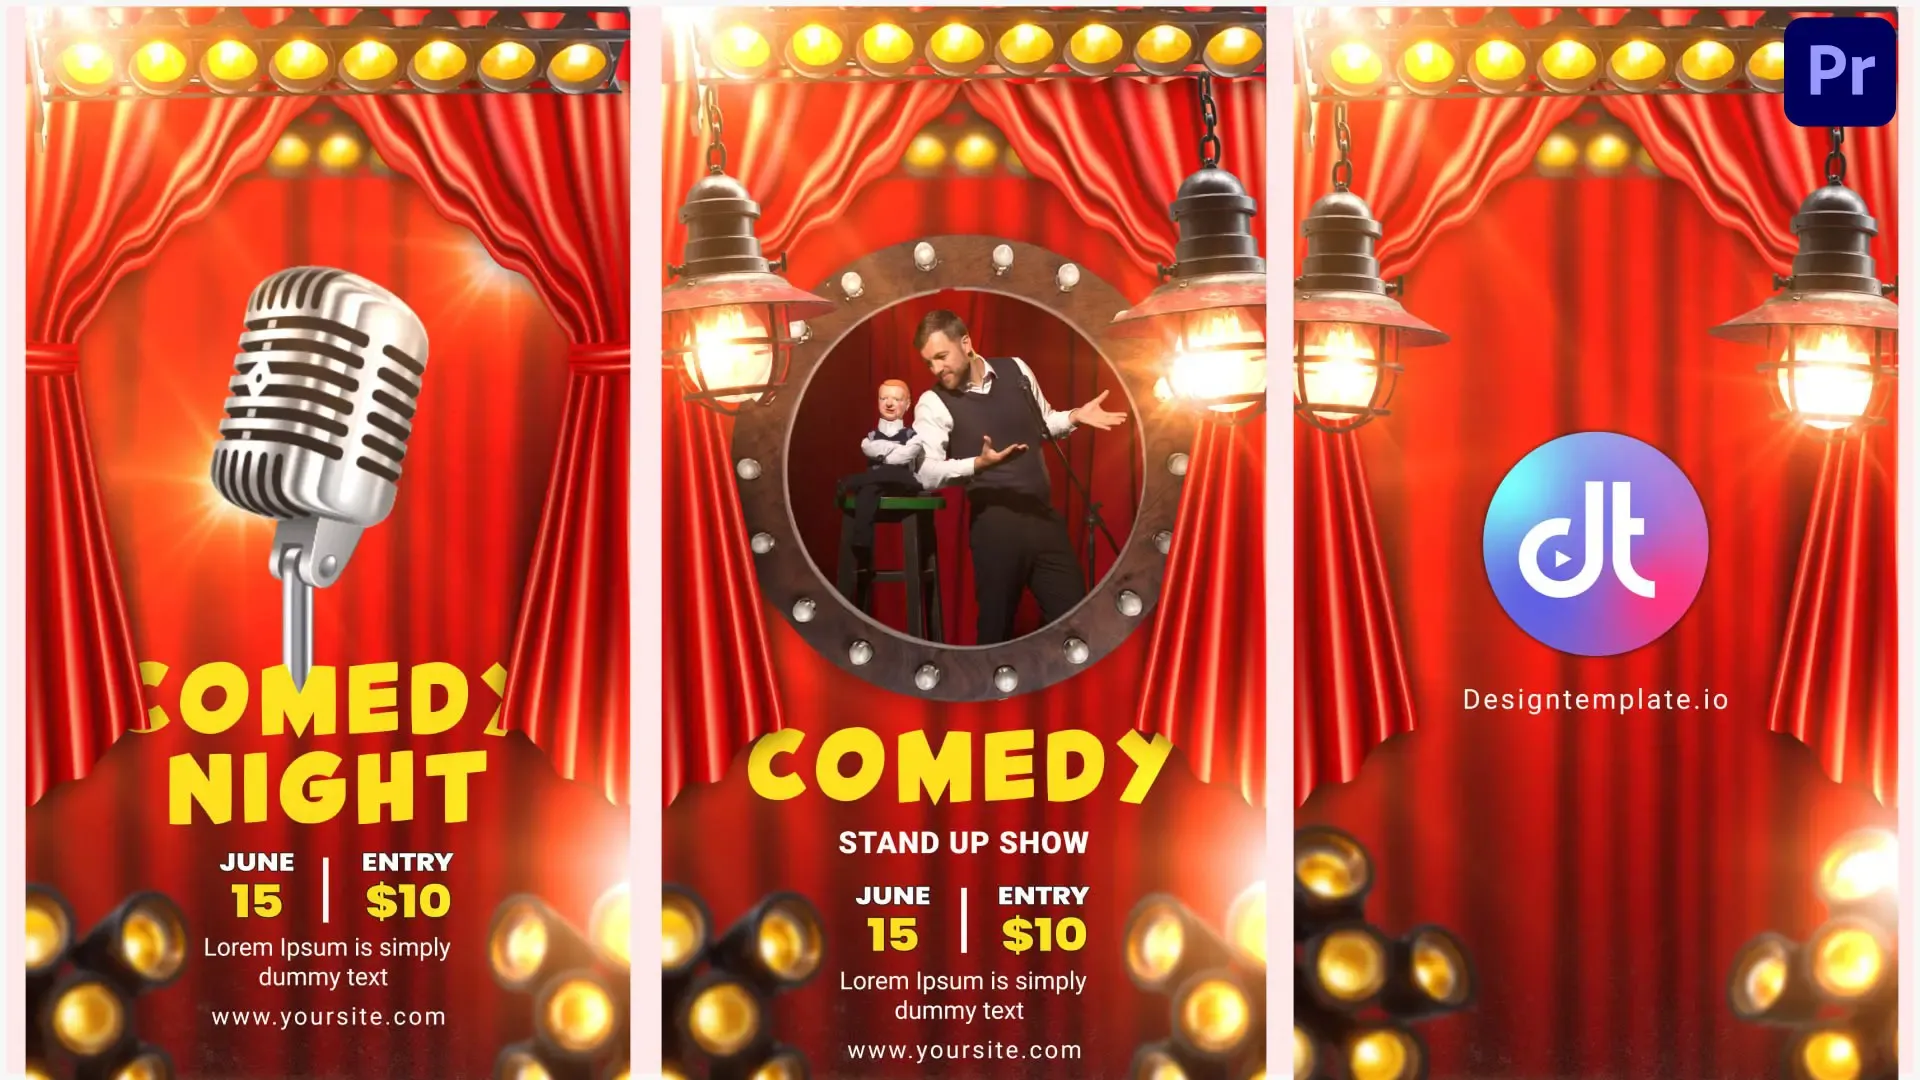 Stand-up Comedy Event Flyer Instagram Story